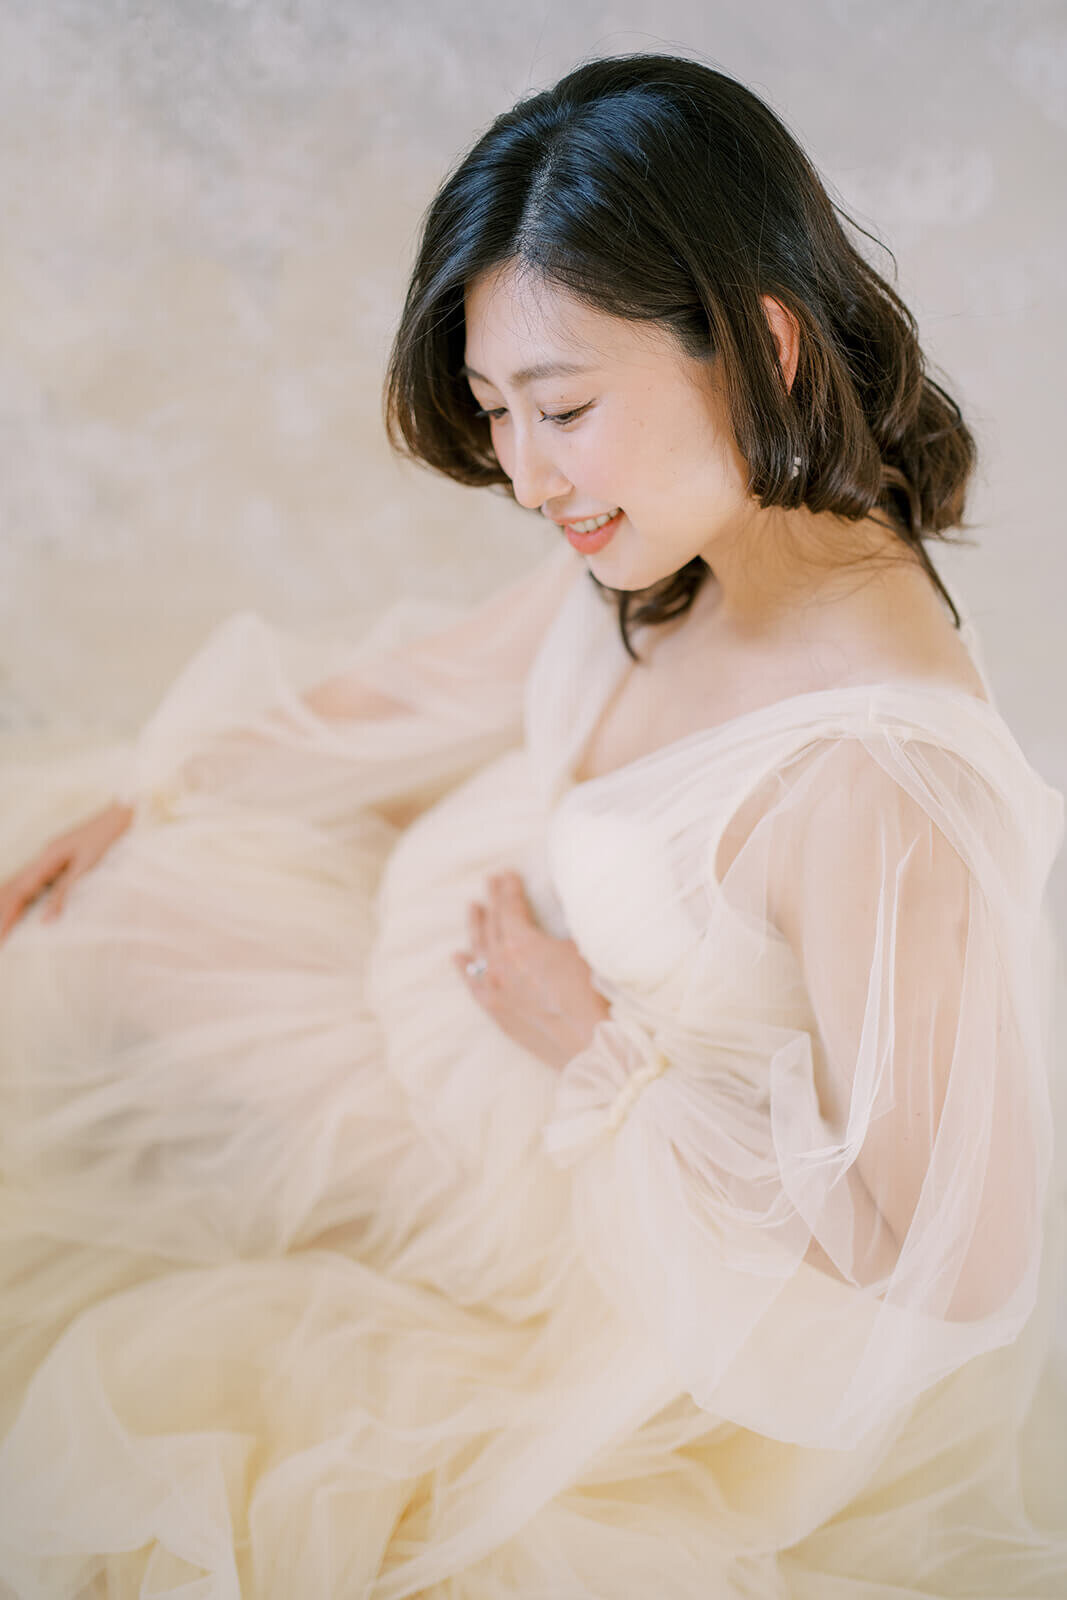 Experience the elegance of maternity as pregnant mum dons a mesmerising cream tulle maternity gown in a Gold Coast studio